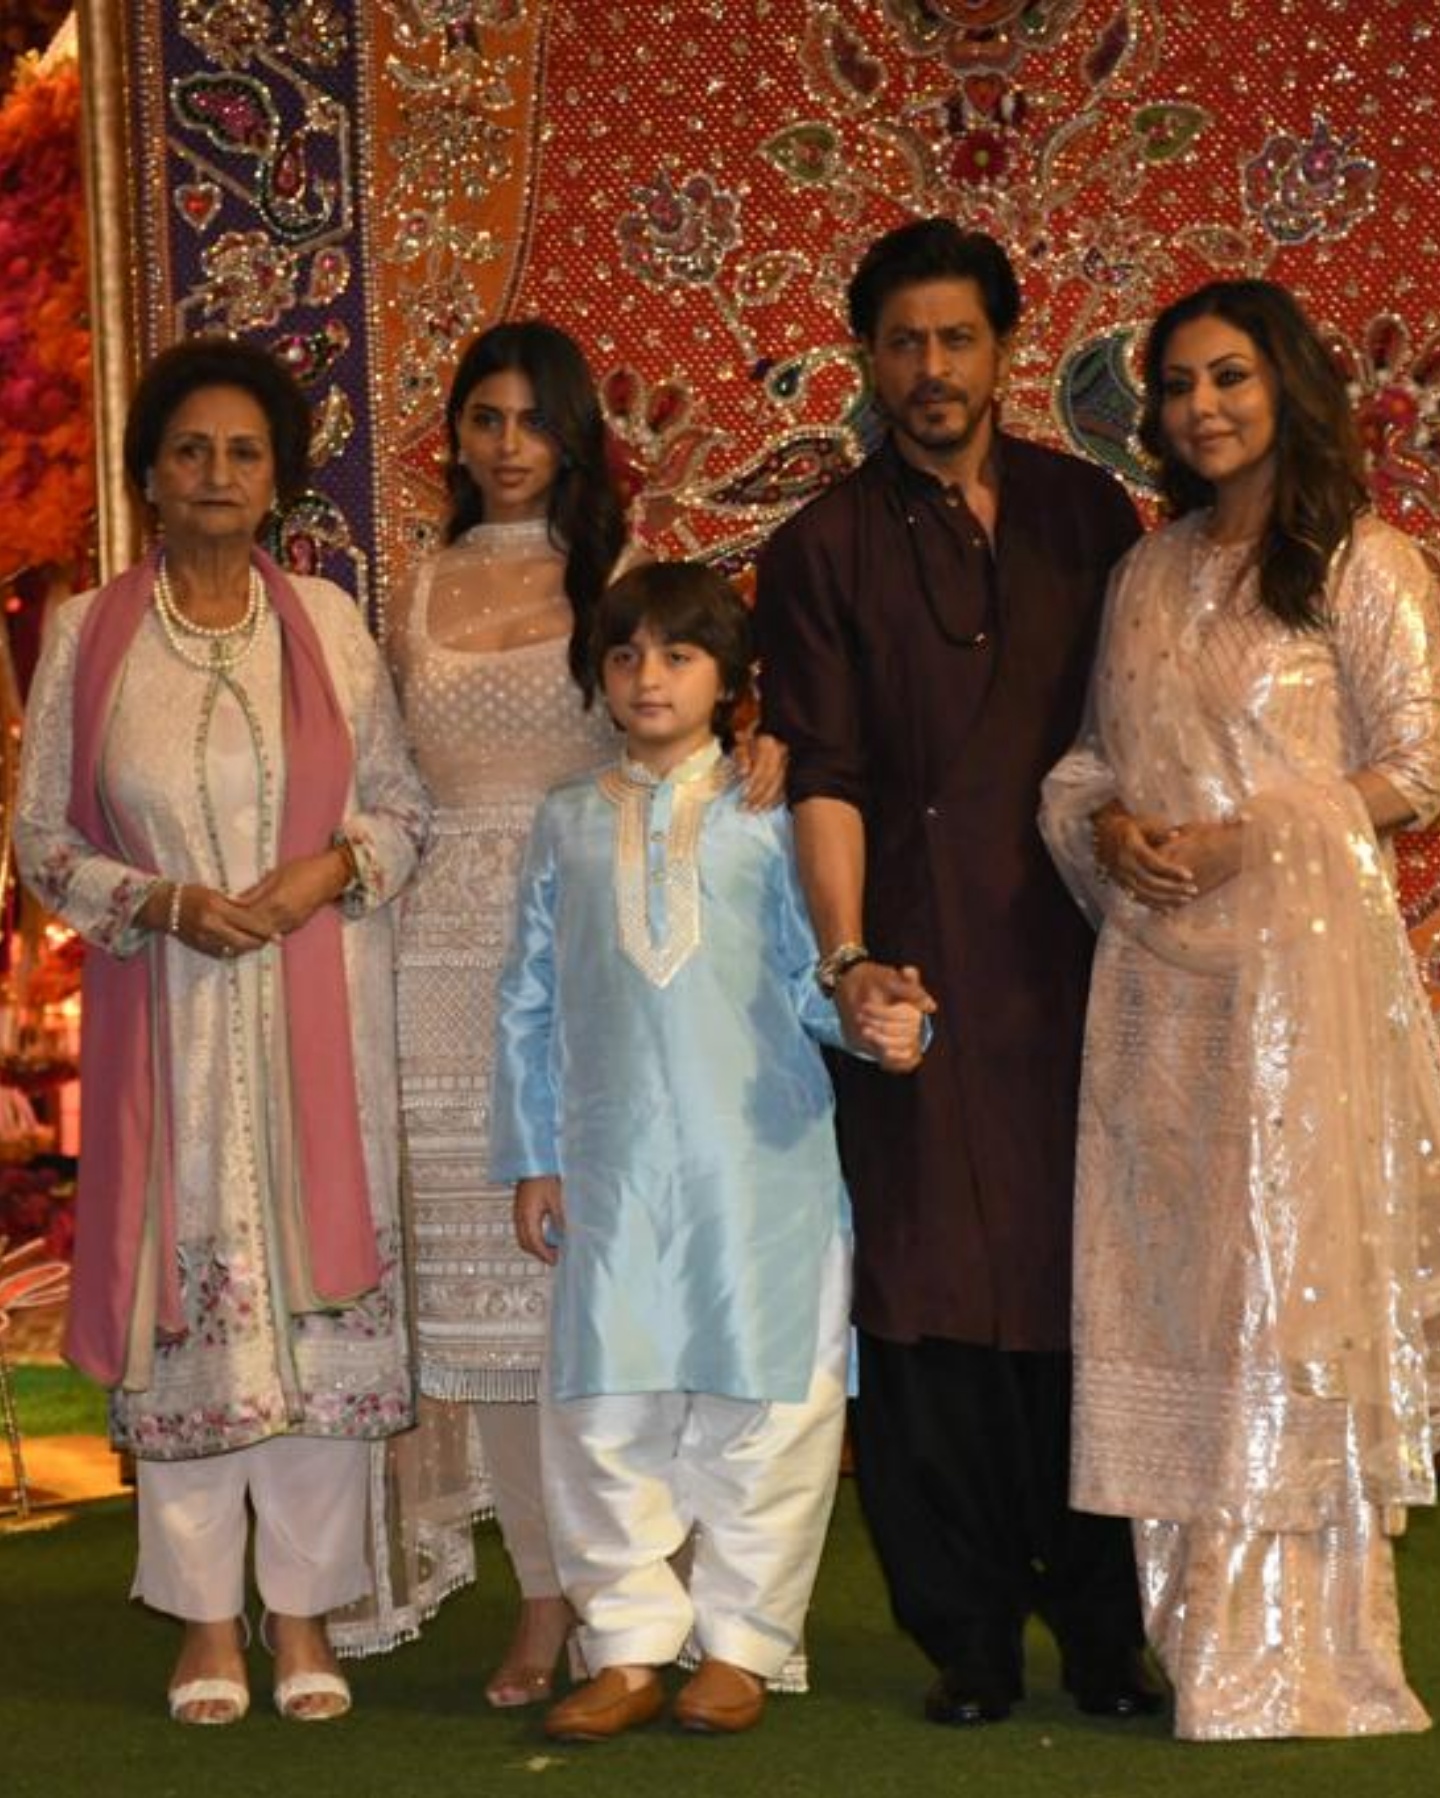 Shah Rukh Khan arrives with family for Ganesh Chaturthi celebrations